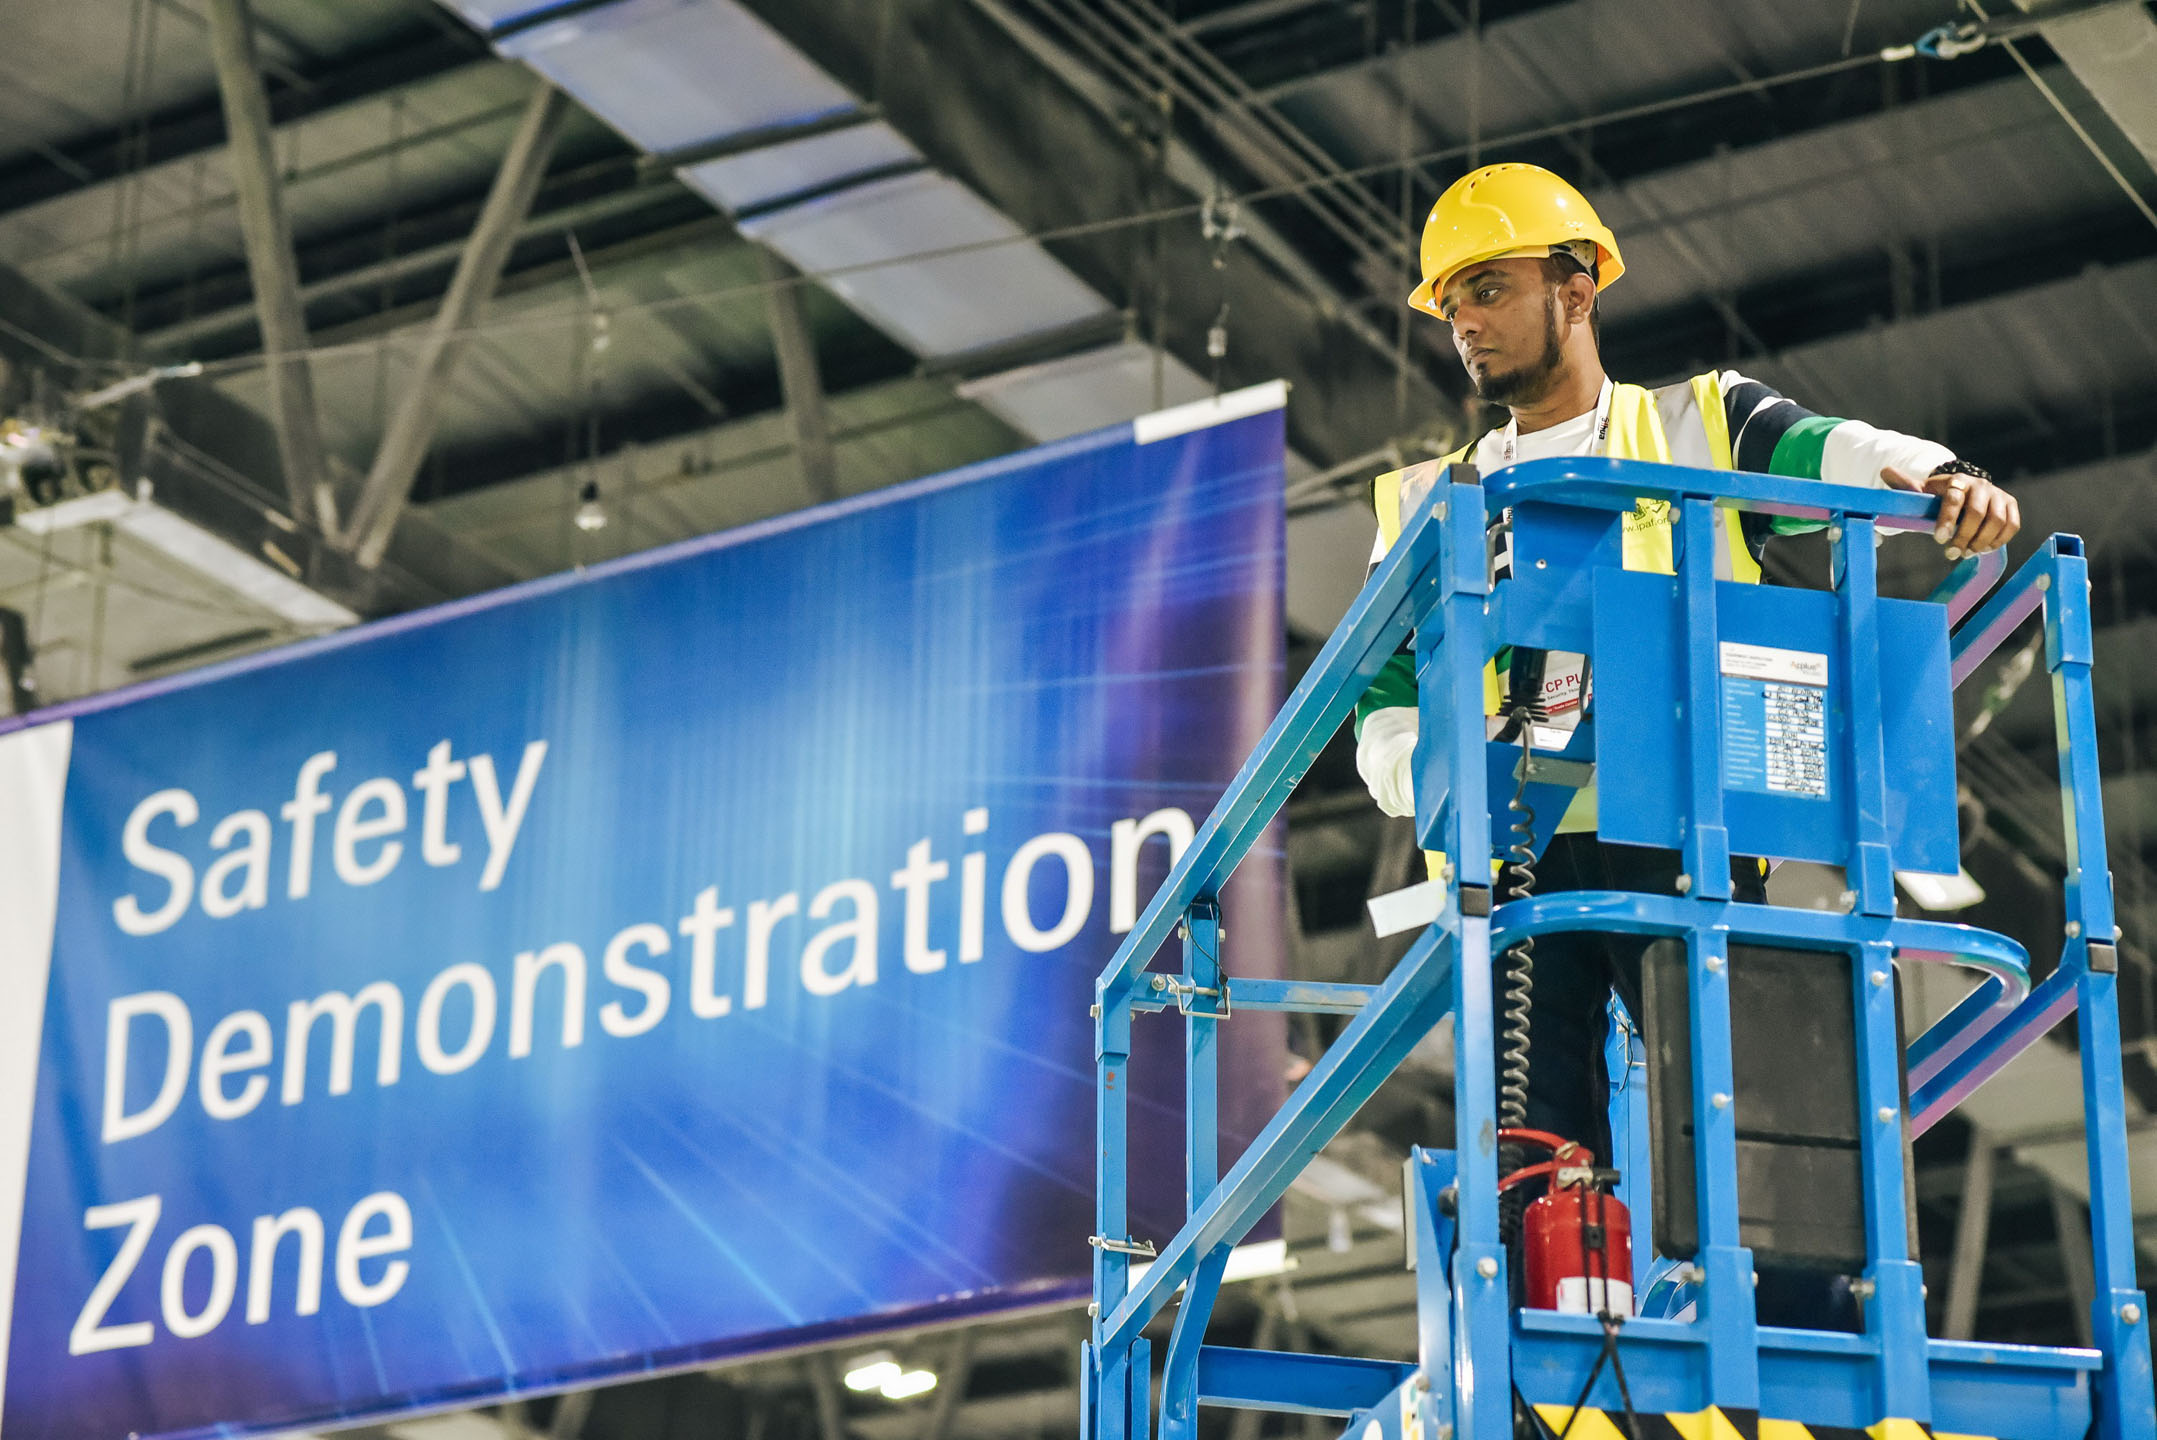 Safety Demonstration at Intersec 2020